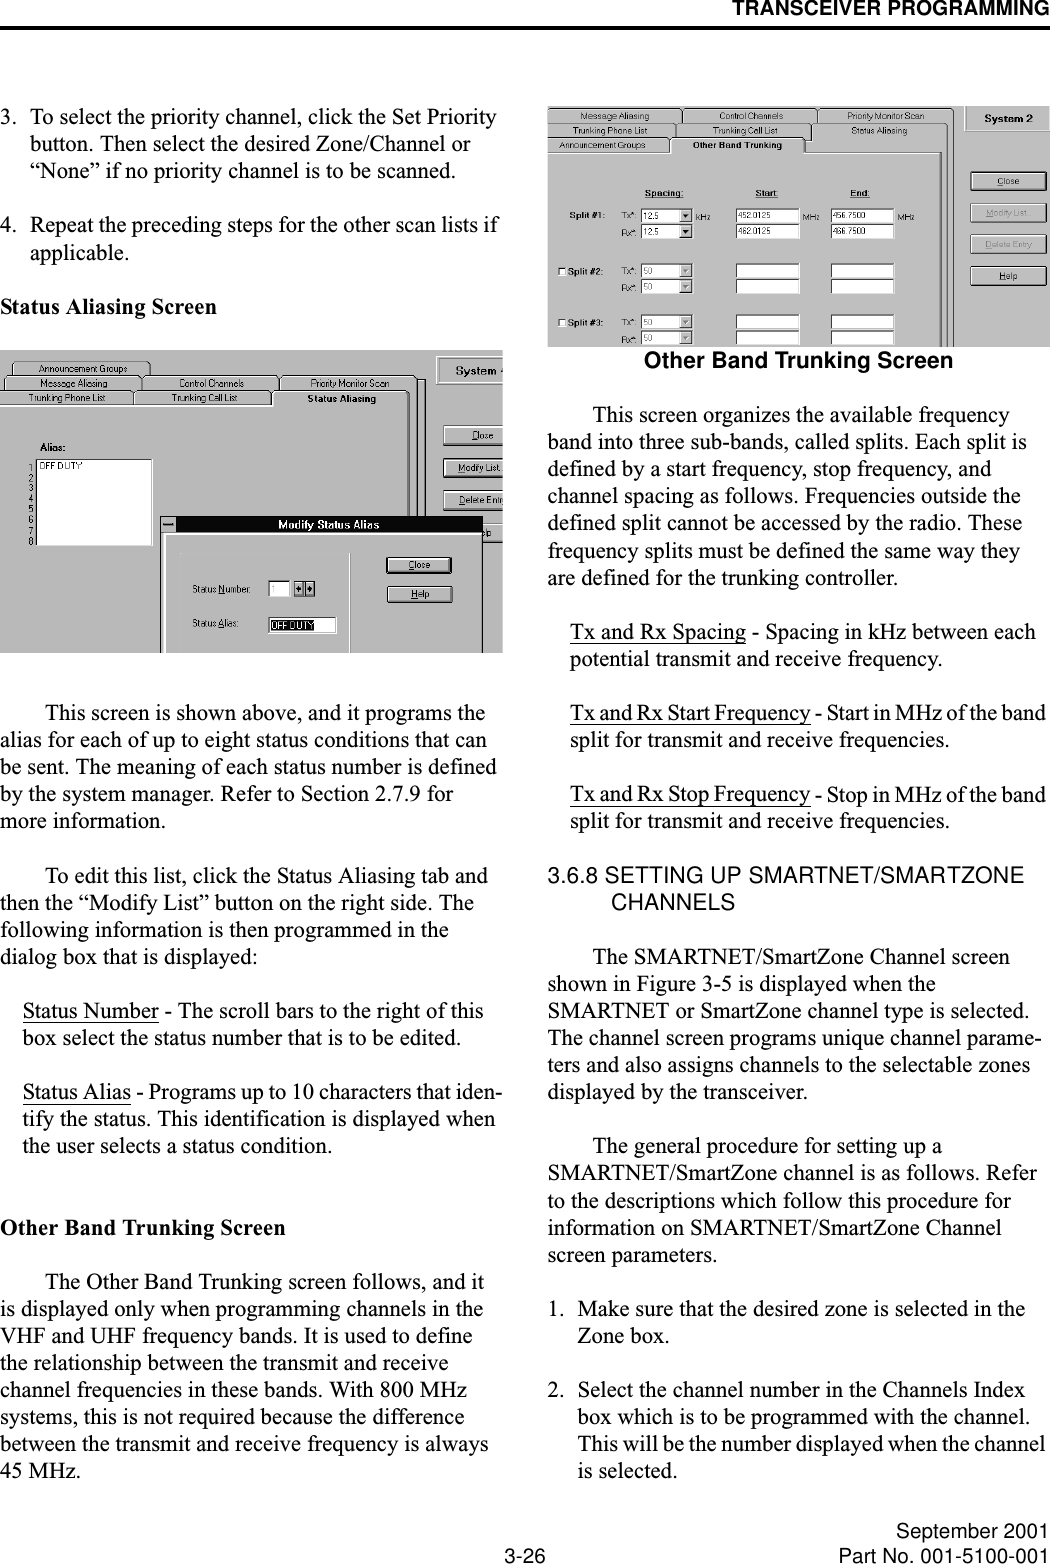 TRANSCEIVER PROGRAMMING3-26 September 2001Part No. 001-5100-0013. To select the priority channel, click the Set Priority button. Then select the desired Zone/Channel or “None” if no priority channel is to be scanned.4. Repeat the preceding steps for the other scan lists if applicable.Status Aliasing ScreenThis screen is shown above, and it programs the alias for each of up to eight status conditions that can be sent. The meaning of each status number is defined by the system manager. Refer to Section 2.7.9 for more information. To edit this list, click the Status Aliasing tab and then the “Modify List” button on the right side. The following information is then programmed in the dialog box that is displayed:Status Number - The scroll bars to the right of this box select the status number that is to be edited. Status Alias - Programs up to 10 characters that iden-tify the status. This identification is displayed when the user selects a status condition.Other Band Trunking ScreenThe Other Band Trunking screen follows, and it is displayed only when programming channels in the VHF and UHF frequency bands. It is used to define the relationship between the transmit and receive channel frequencies in these bands. With 800 MHz systems, this is not required because the difference between the transmit and receive frequency is always 45 MHz. Other Band Trunking ScreenThis screen organizes the available frequency band into three sub-bands, called splits. Each split is defined by a start frequency, stop frequency, and channel spacing as follows. Frequencies outside the defined split cannot be accessed by the radio. These frequency splits must be defined the same way they are defined for the trunking controller.Tx and Rx Spacing - Spacing in kHz between each potential transmit and receive frequency.Tx and Rx Start Frequency - Start in MHz of the band split for transmit and receive frequencies.Tx and Rx Stop Frequency - Stop in MHz of the band split for transmit and receive frequencies.3.6.8 SETTING UP SMARTNET/SMARTZONE CHANNELS The SMARTNET/SmartZone Channel screen shown in Figure 3-5 is displayed when the SMARTNET or SmartZone channel type is selected. The channel screen programs unique channel parame-ters and also assigns channels to the selectable zones displayed by the transceiver.The general procedure for setting up a SMARTNET/SmartZone channel is as follows. Refer to the descriptions which follow this procedure for information on SMARTNET/SmartZone Channel screen parameters.1. Make sure that the desired zone is selected in the Zone box. 2. Select the channel number in the Channels Index box which is to be programmed with the channel. This will be the number displayed when the channel is selected.